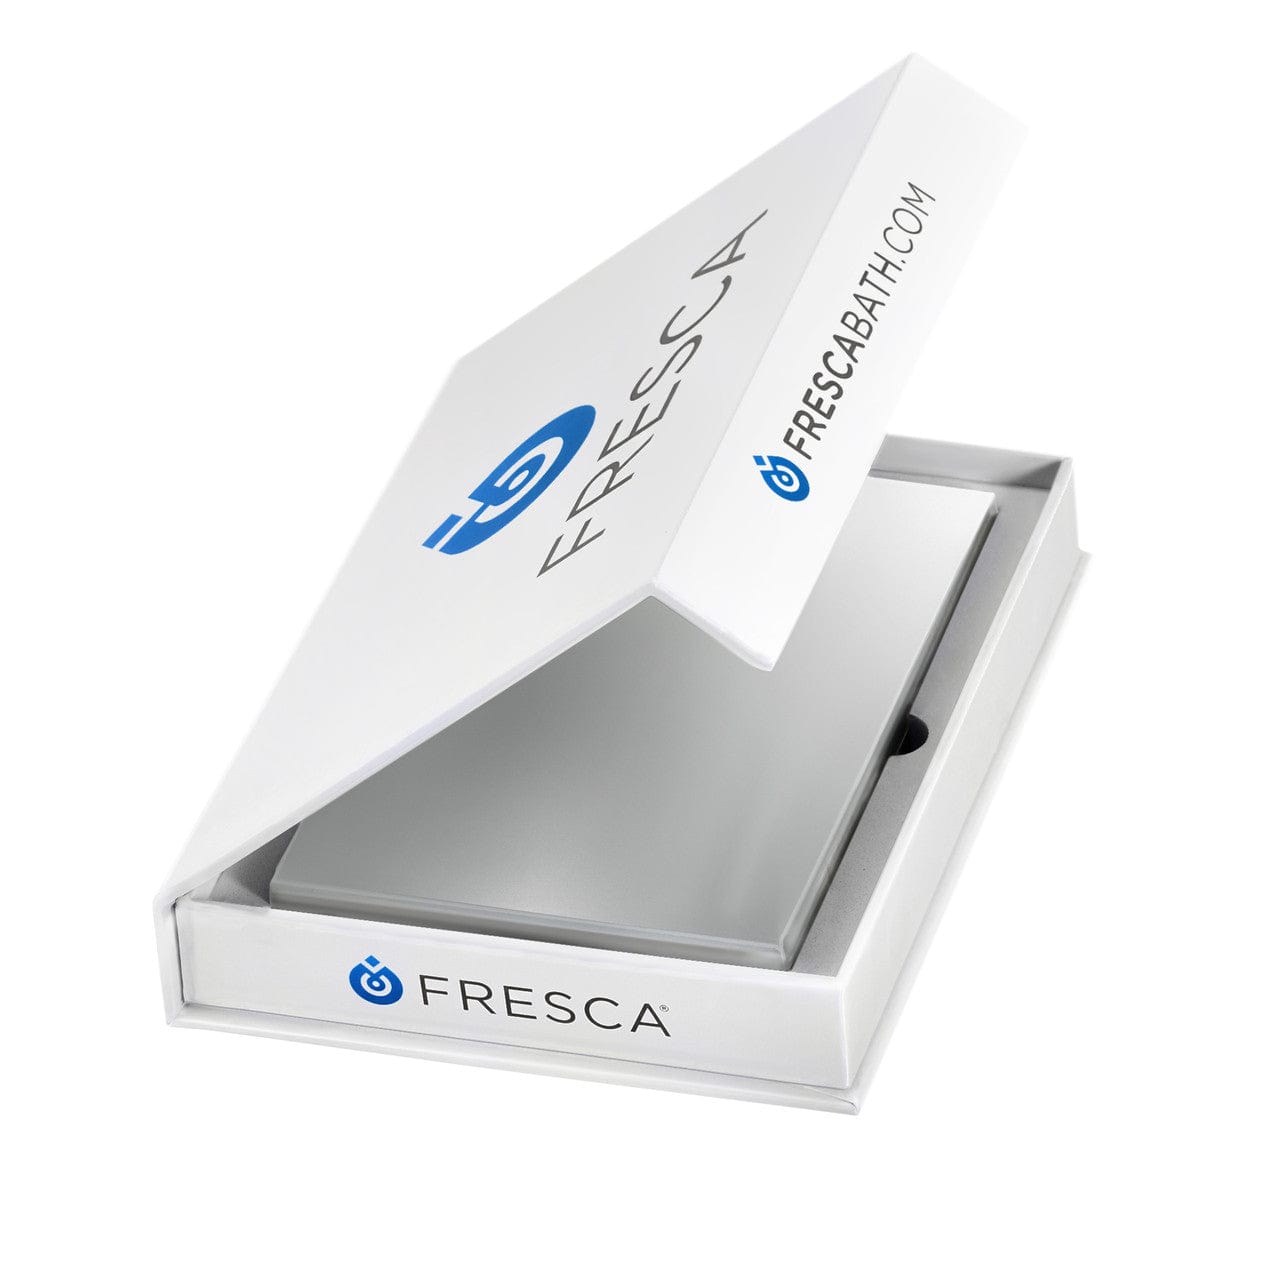 Fresca Wood Color Sample in Glossy Gray  in the box